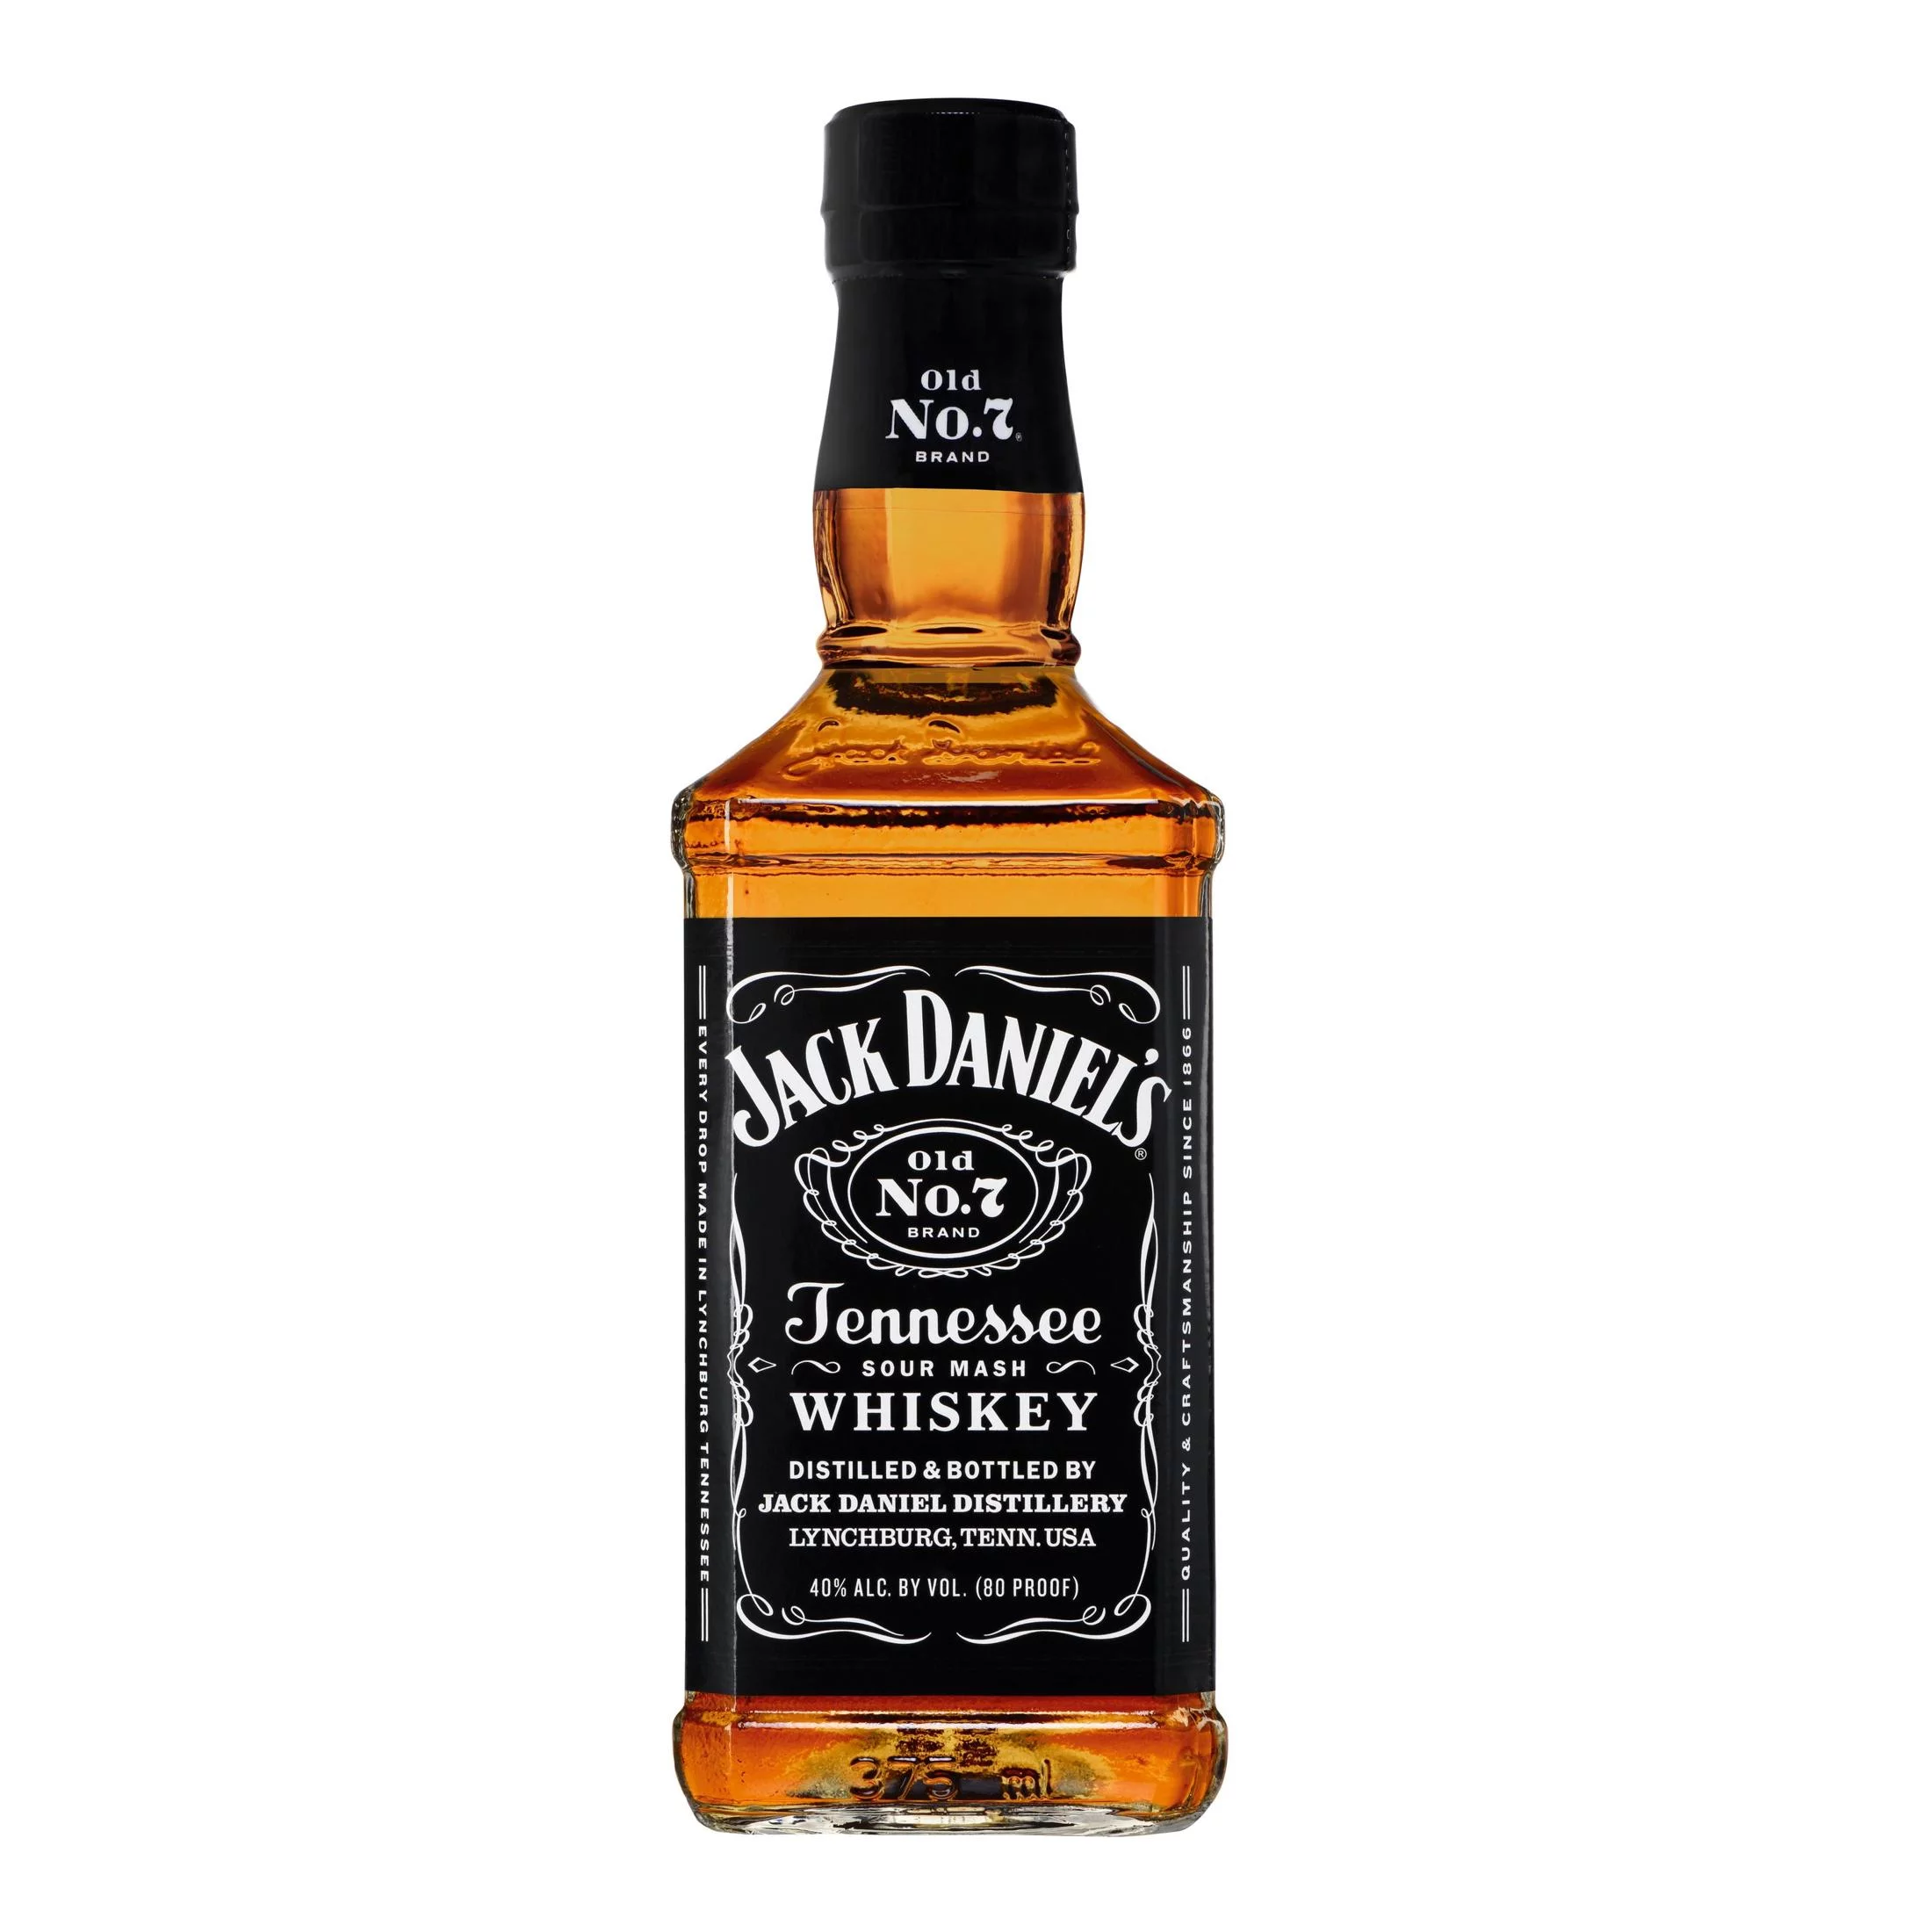 Jack-Daniel-s-Old-No-7-Tennessee-Whiskey-375-ml-Bottle-80-Proof_eb4df105-82ab-4975-a462-fb5e537f8f62.2a62084bfb0359fcbc08d1fdef77e01d